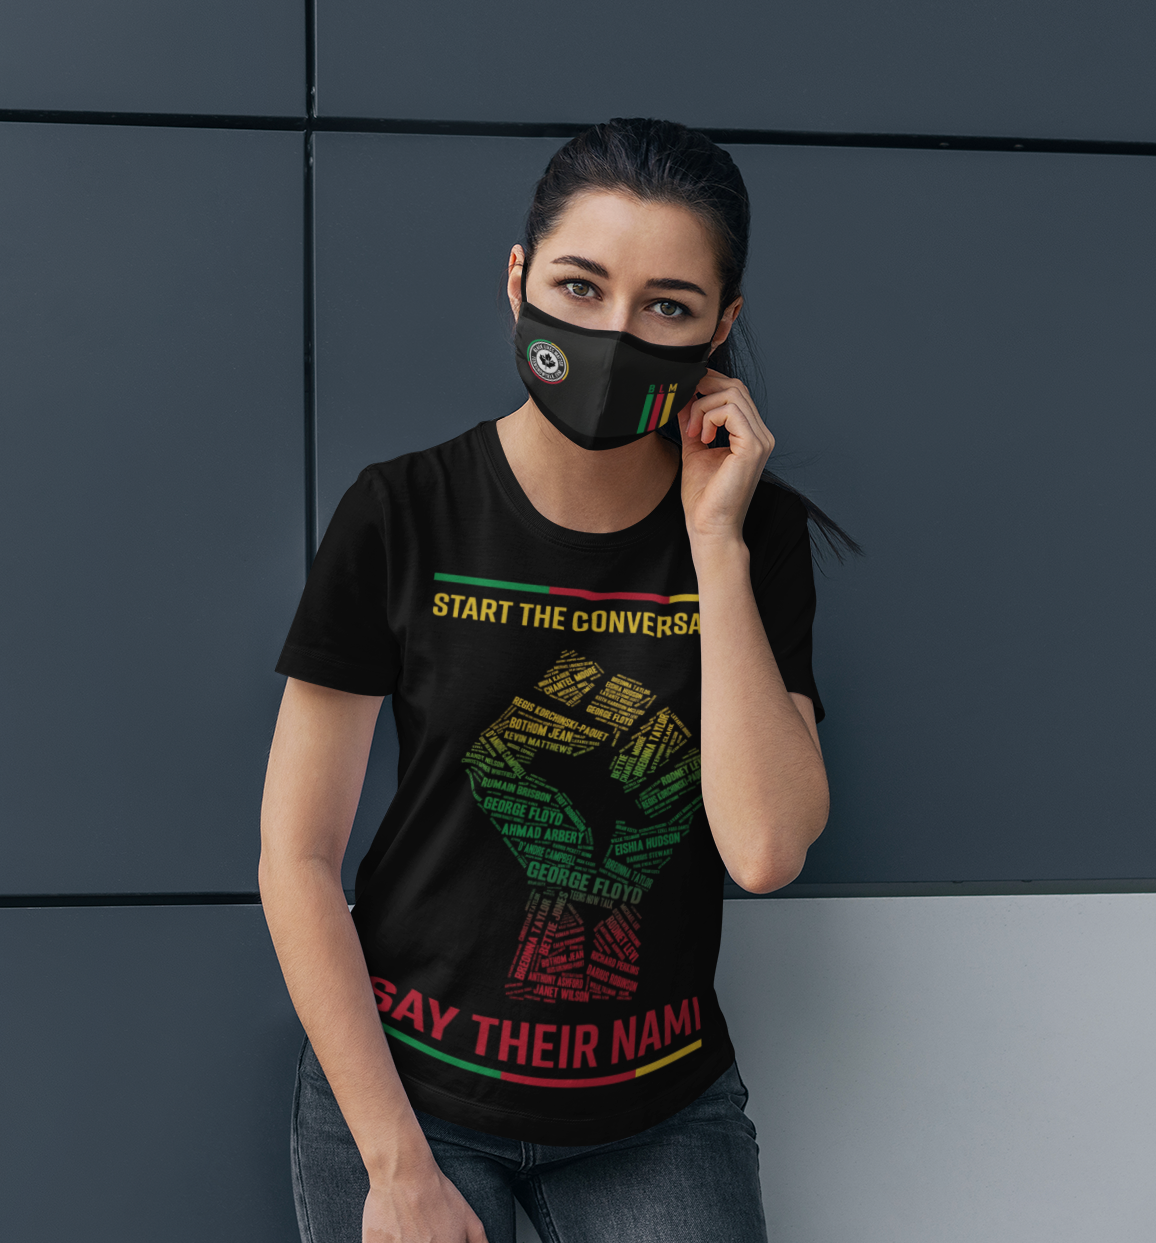 BLM Teens Now Talk Face Cover -  Black Lives Matter Collection